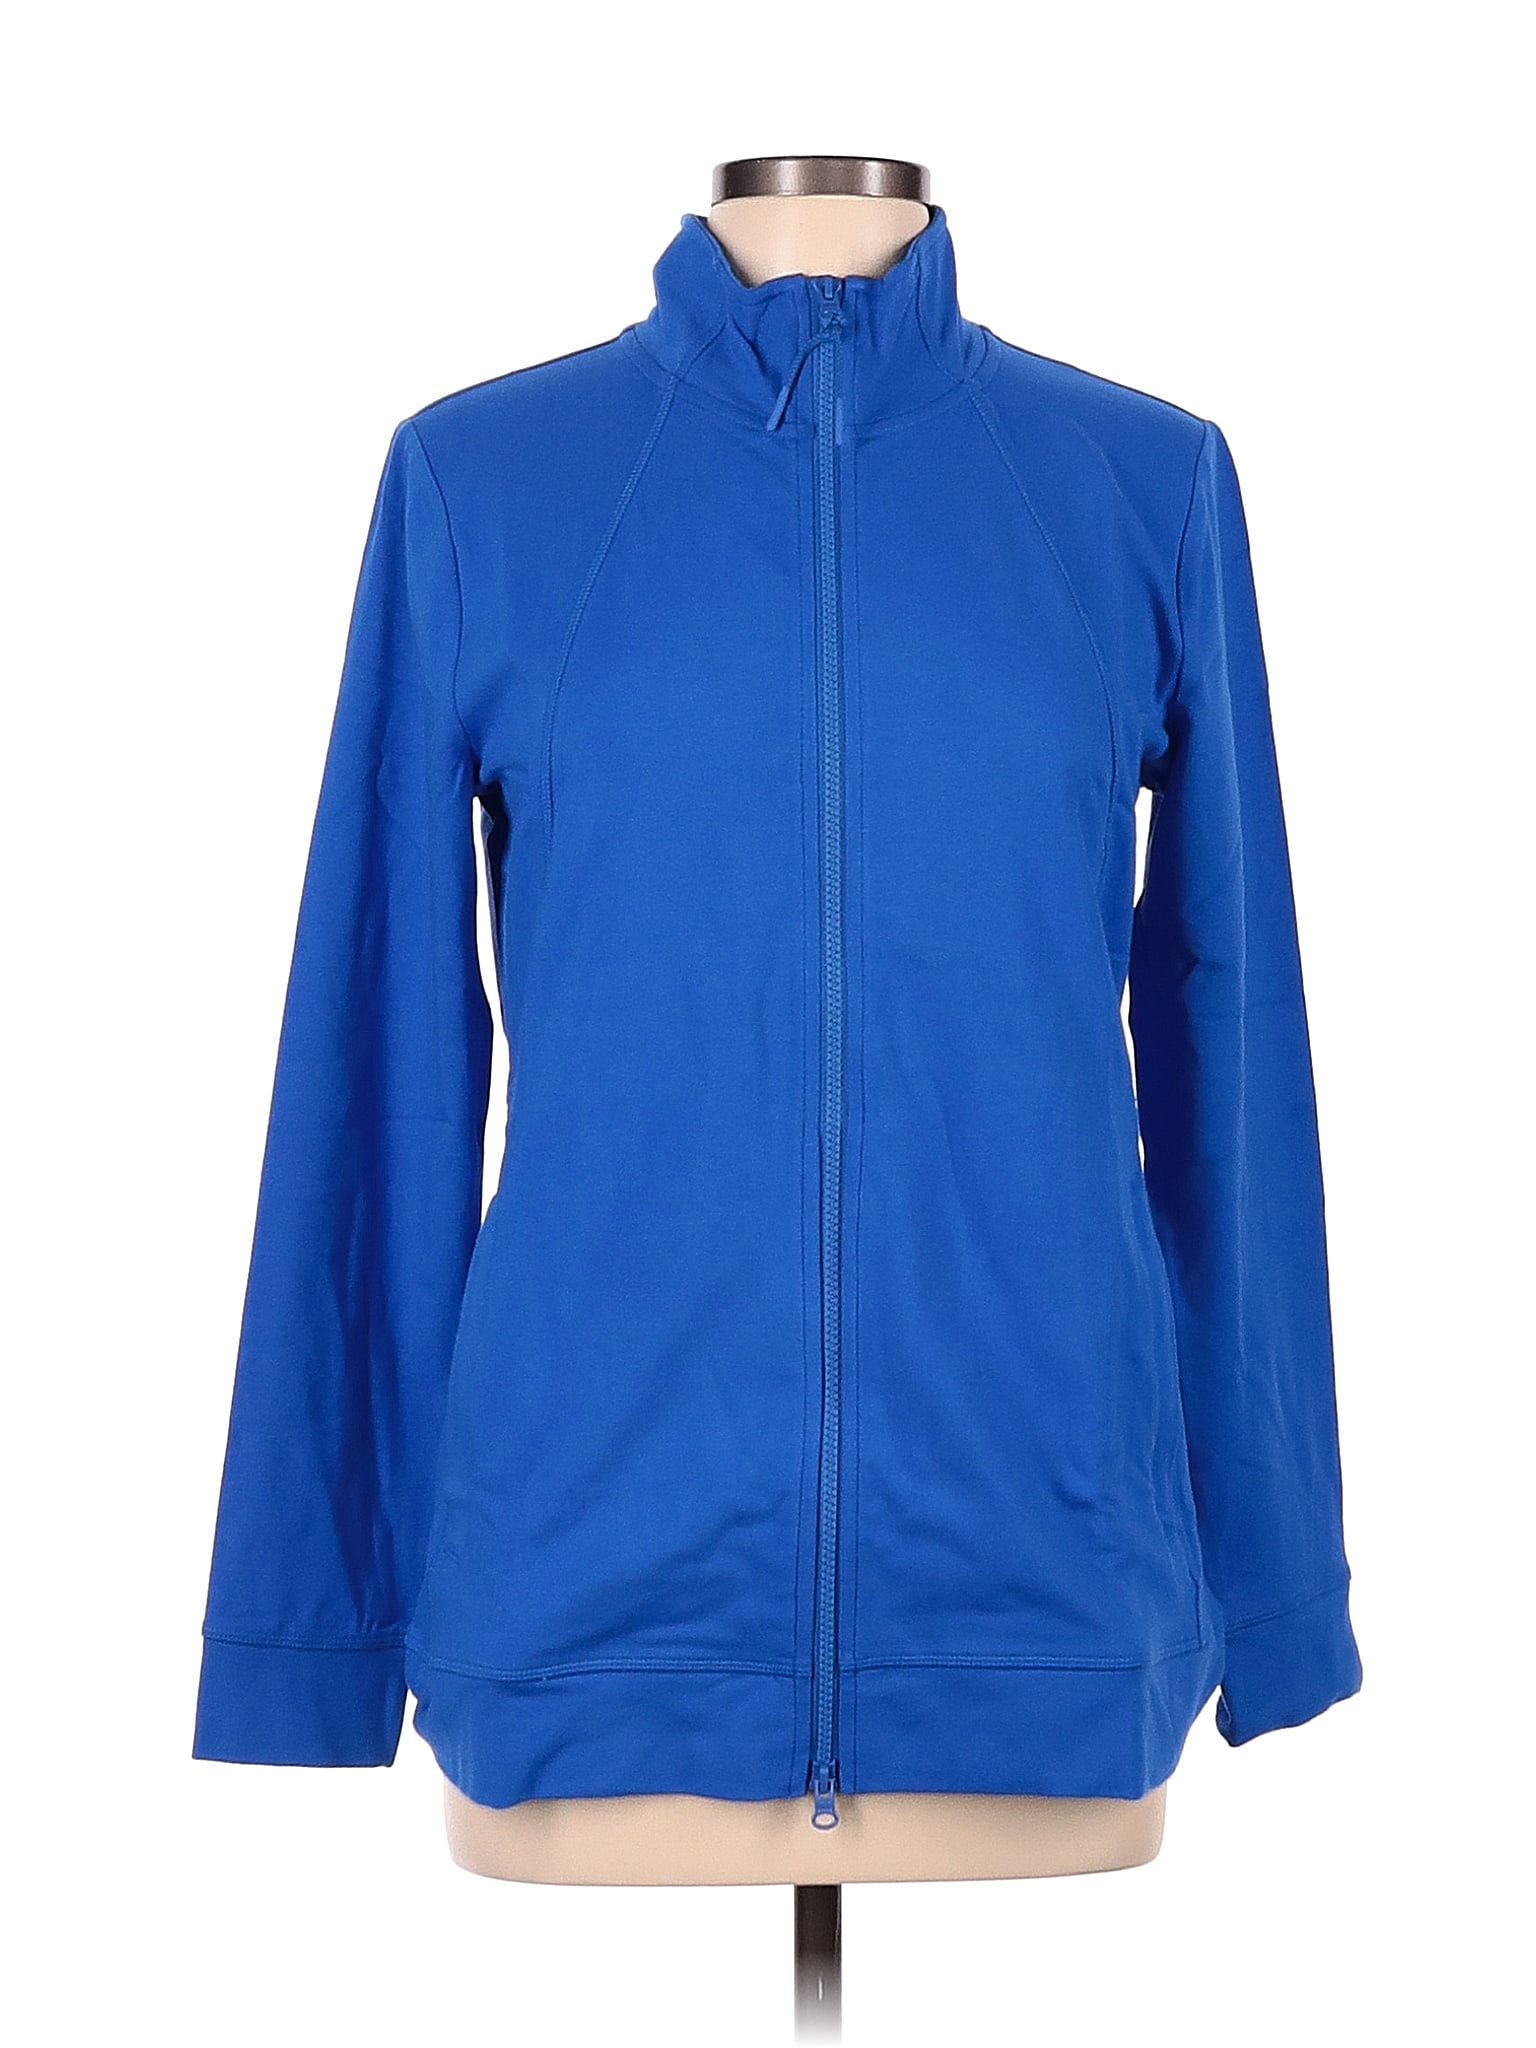 T by Talbots Solid Blue Track Jacket Size M - 70% off | thredUP